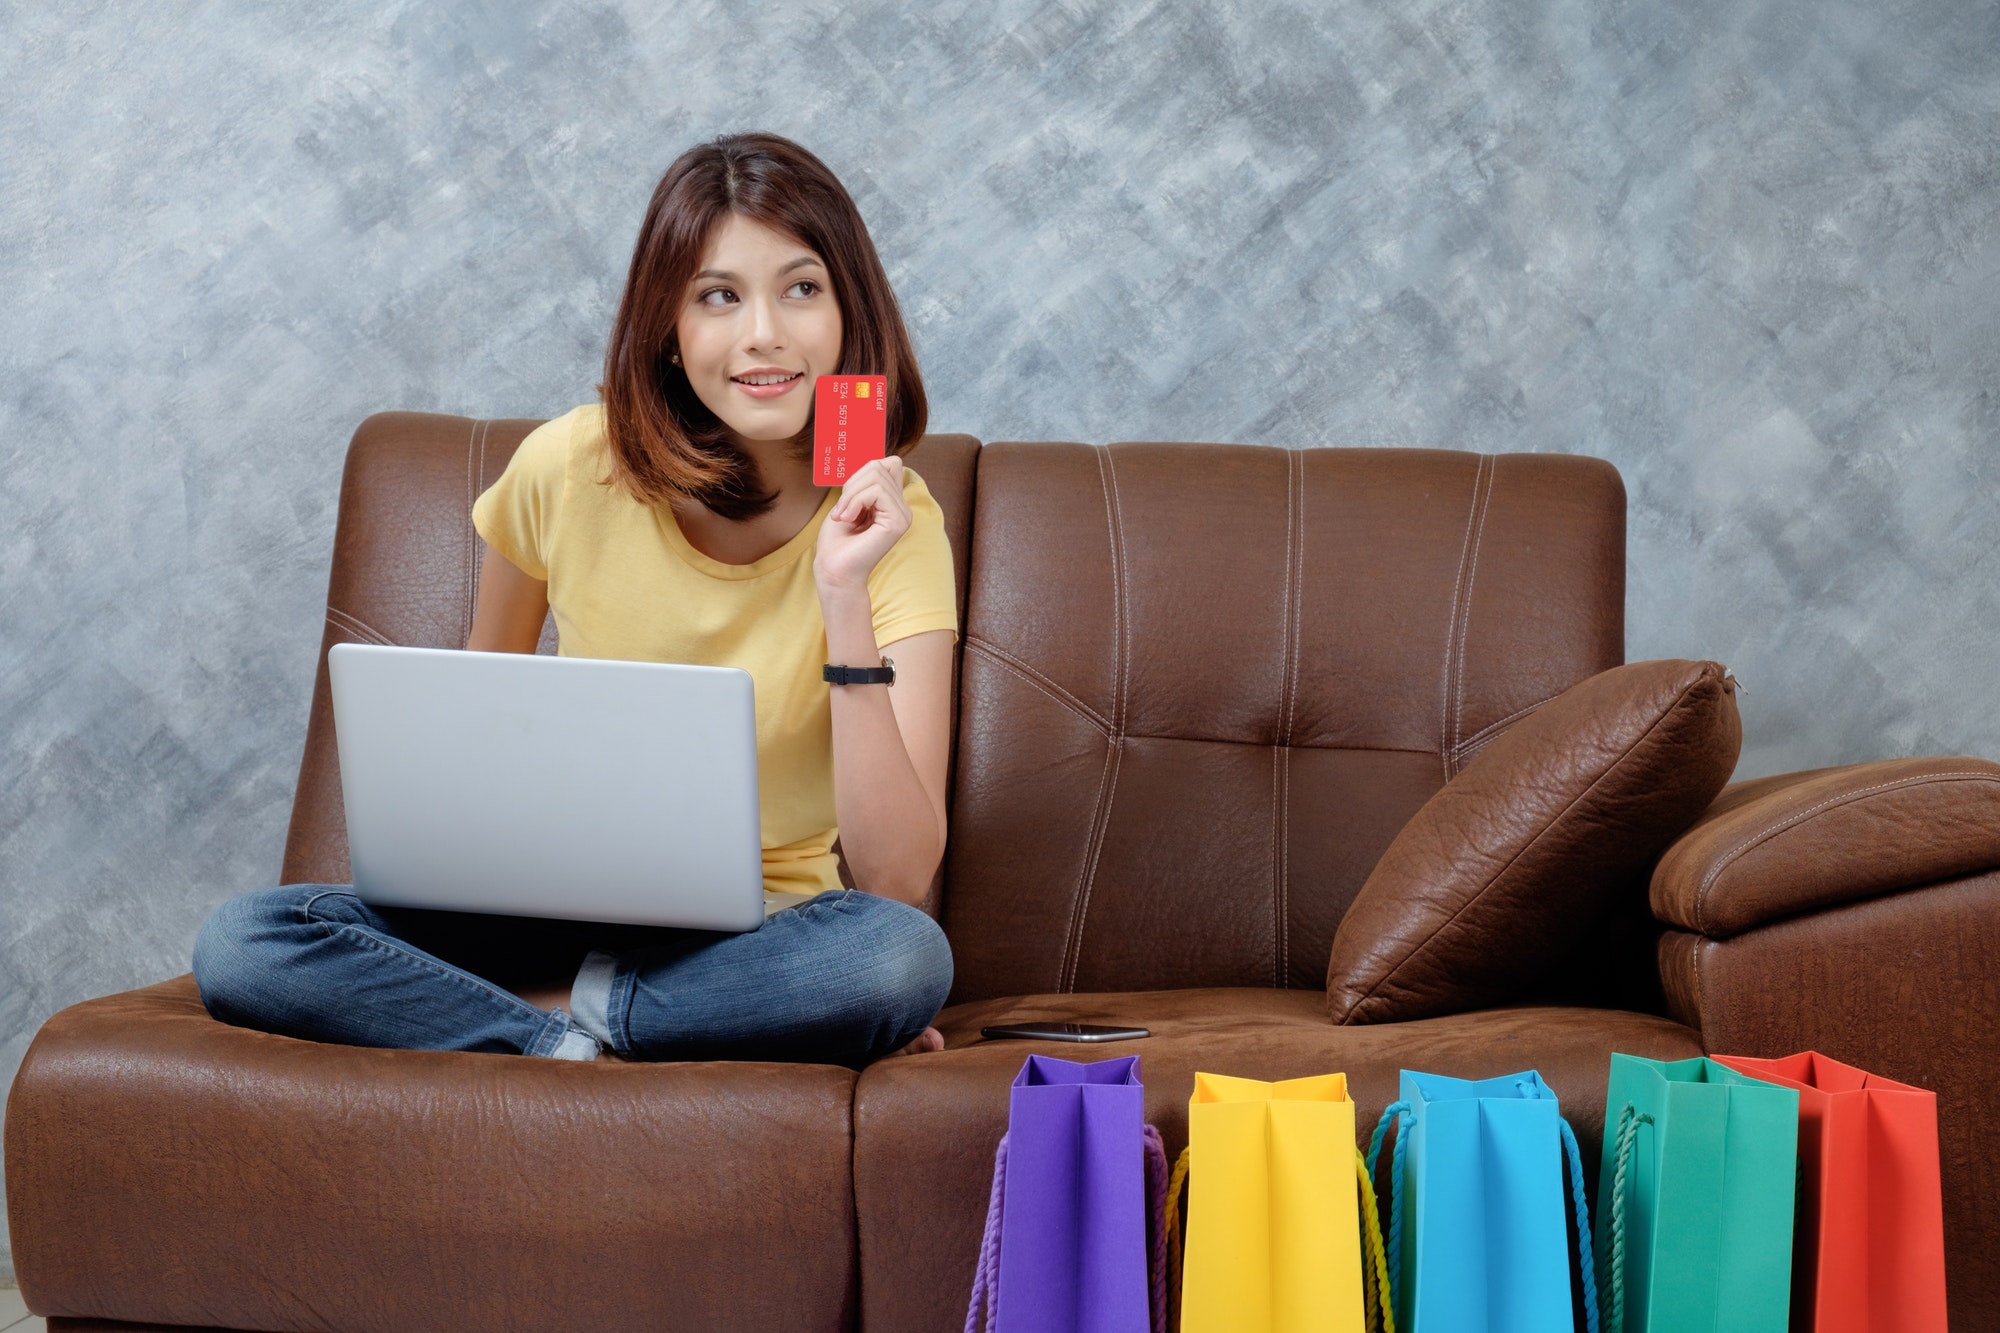 Online shopping. Customer shopping online pay by credit card.